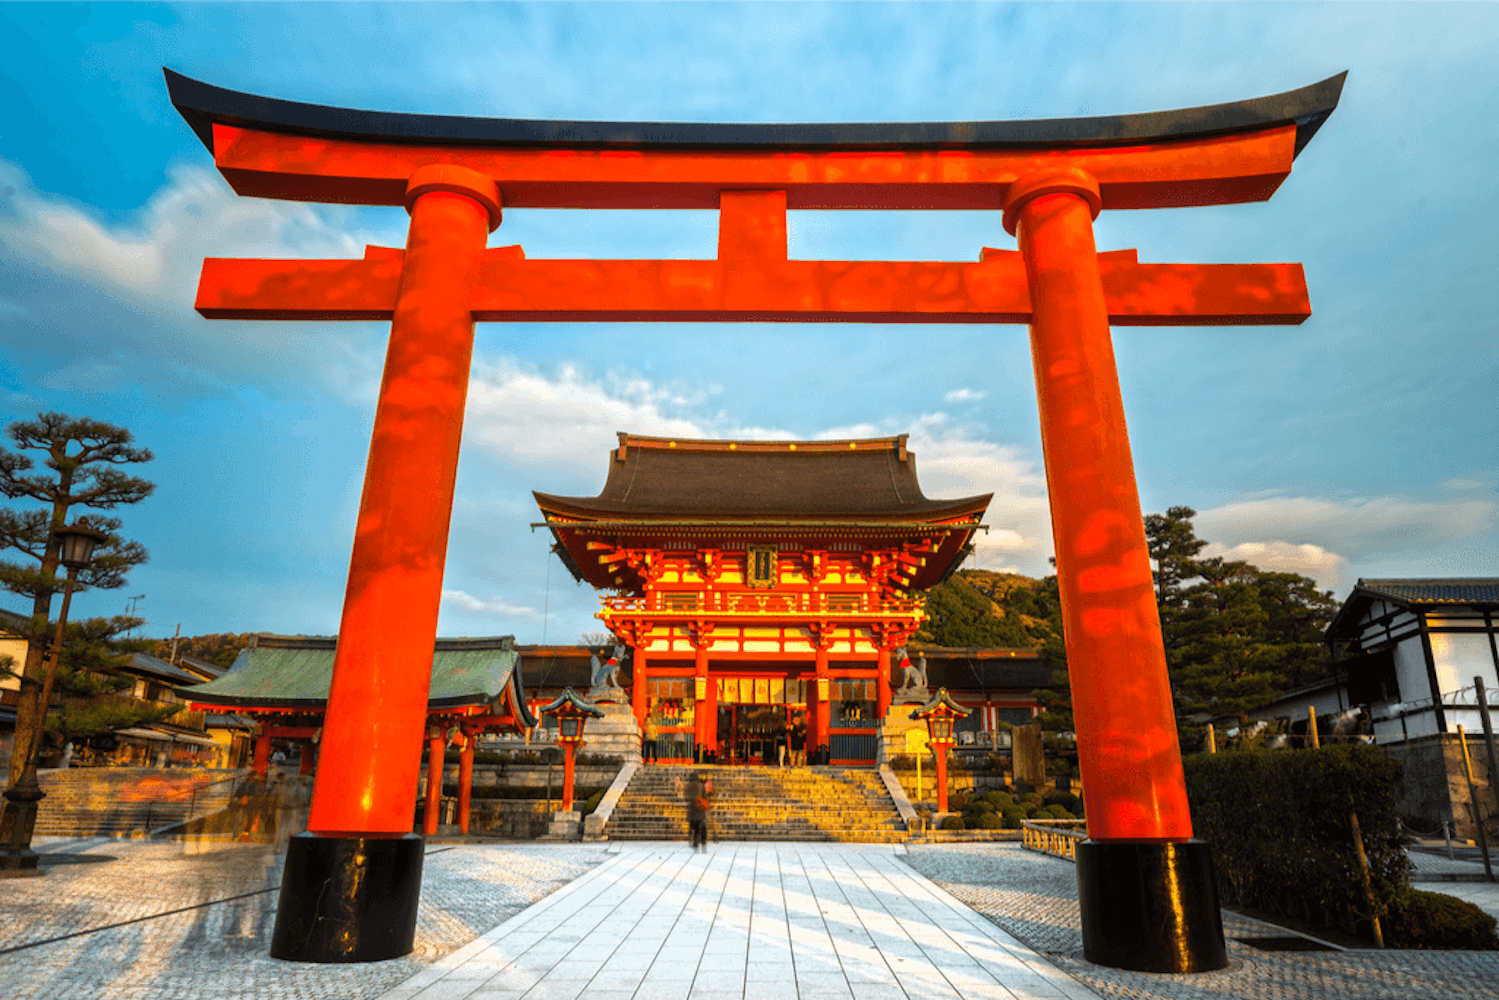 A majestic symbol of Japan's rich heritage, a vibrant red Torii gate stands proudly before a serene Shinto Shrine